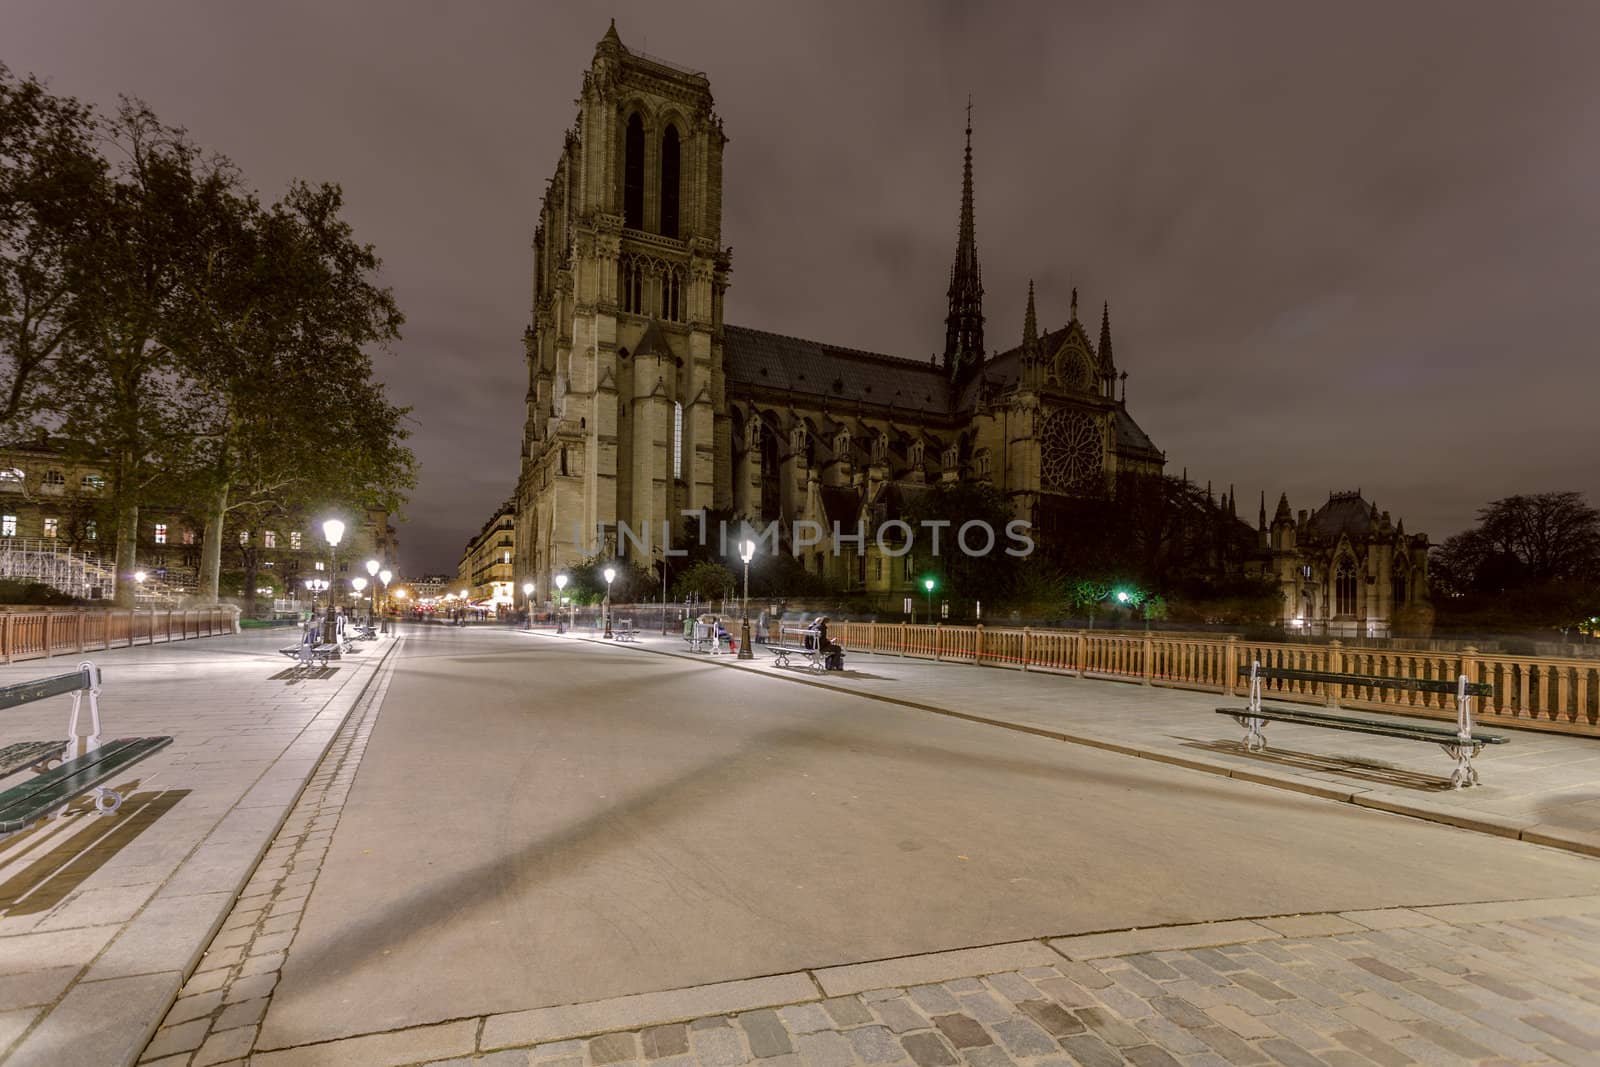 Notre Dame at night in Paris, France by Roka